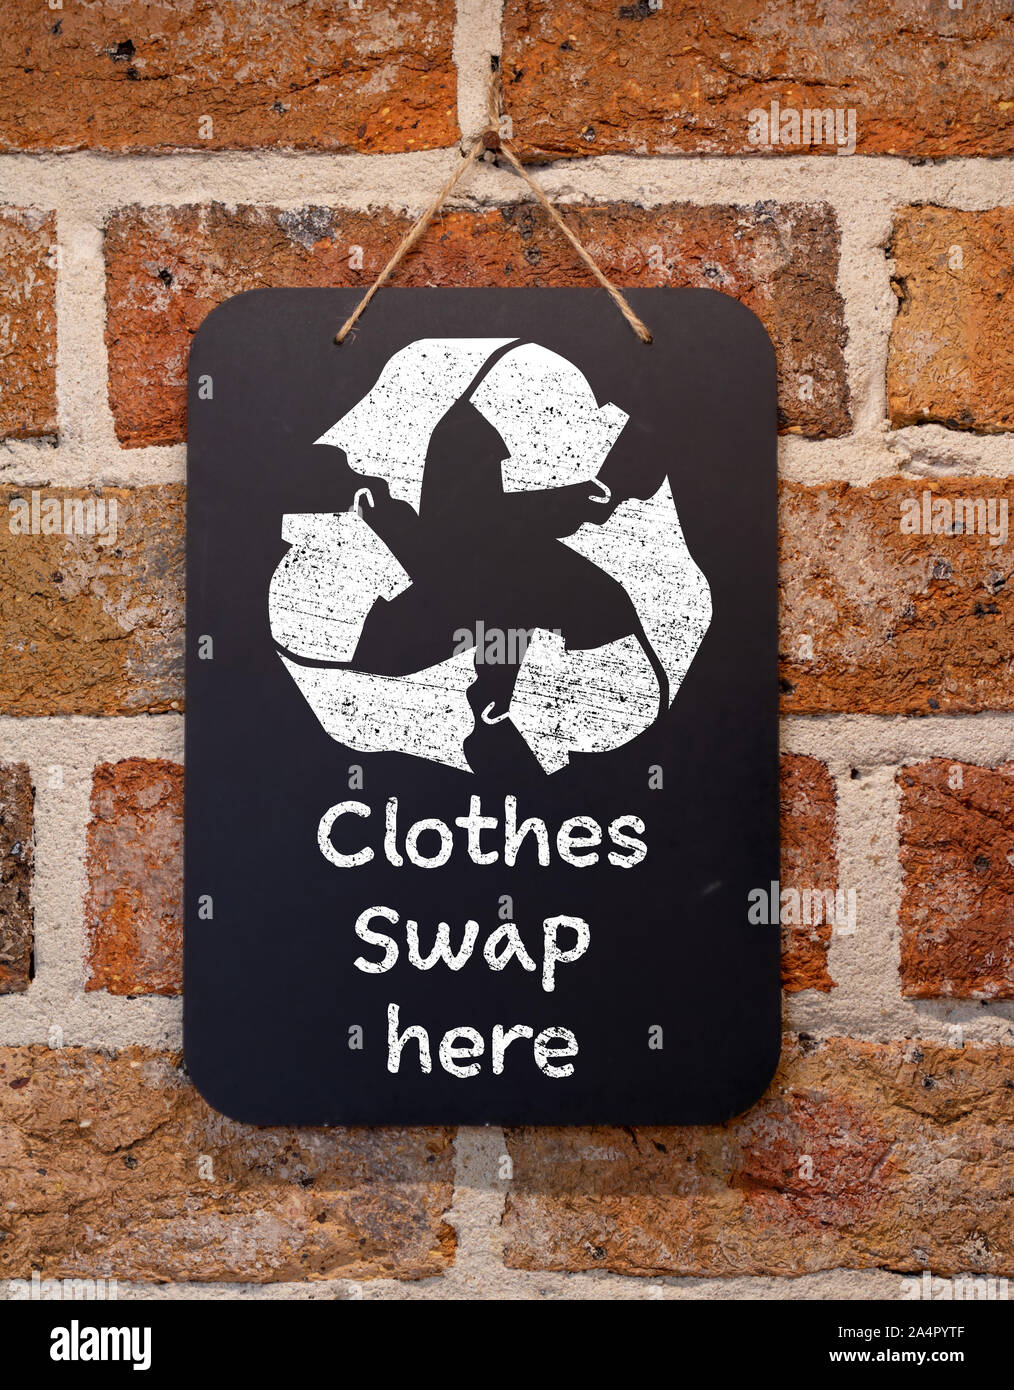 Clothes Swap here text and symbol on chalk board, sustainable fashion and zero waste, recycle clothes and textiles to reduce waste Stock Photo